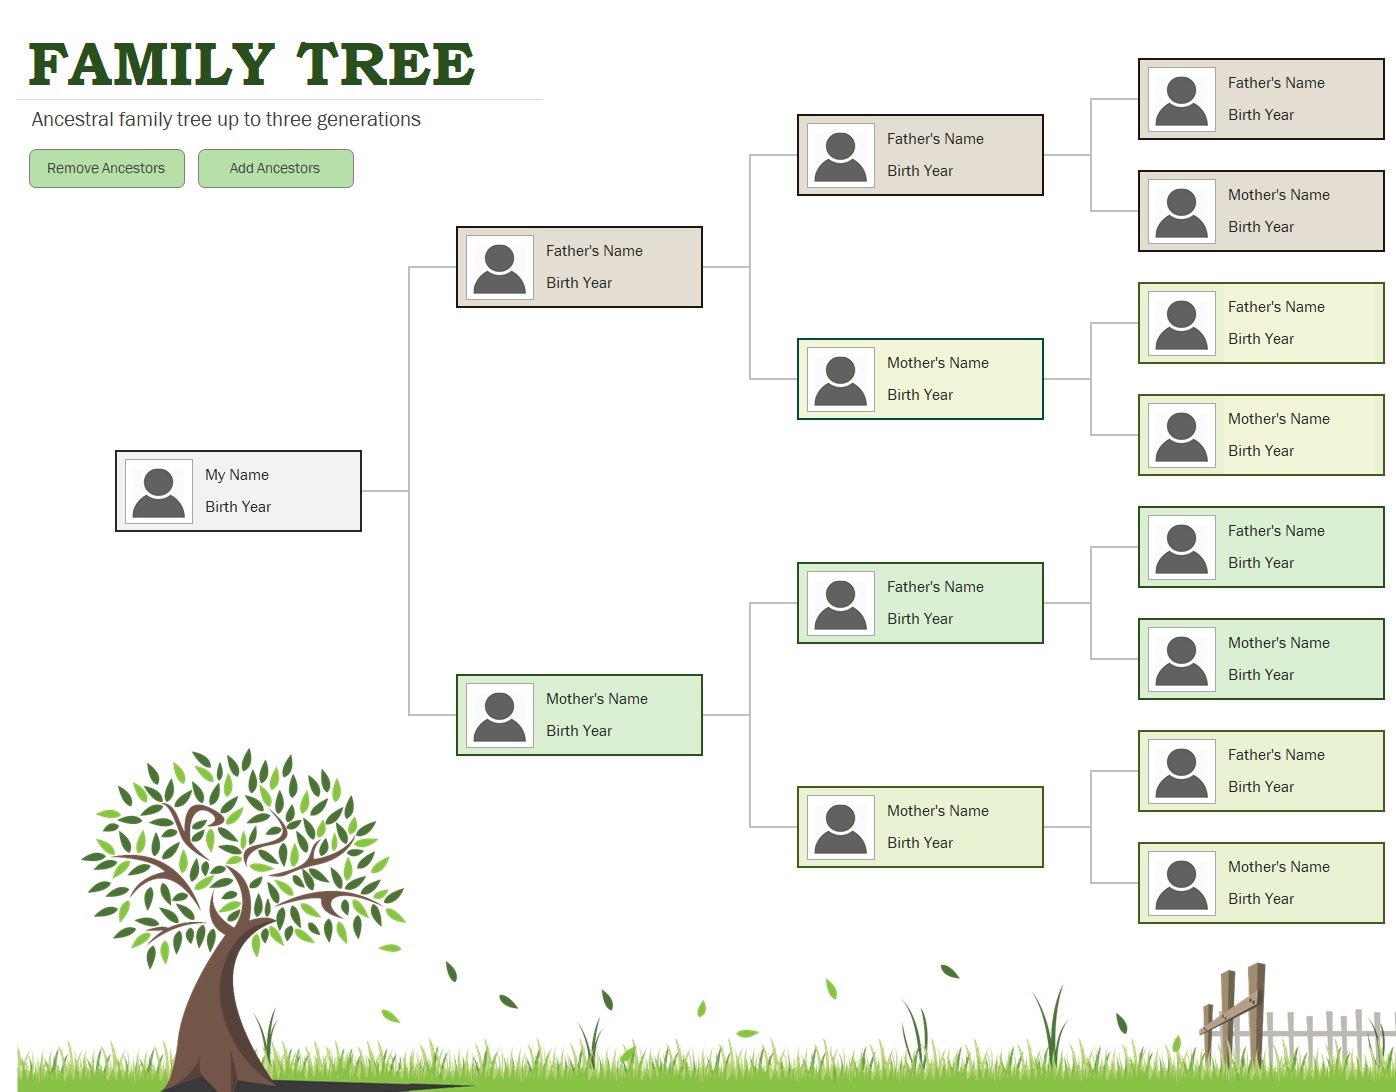 Photo Family Tree Template In Excel Download xlsx 